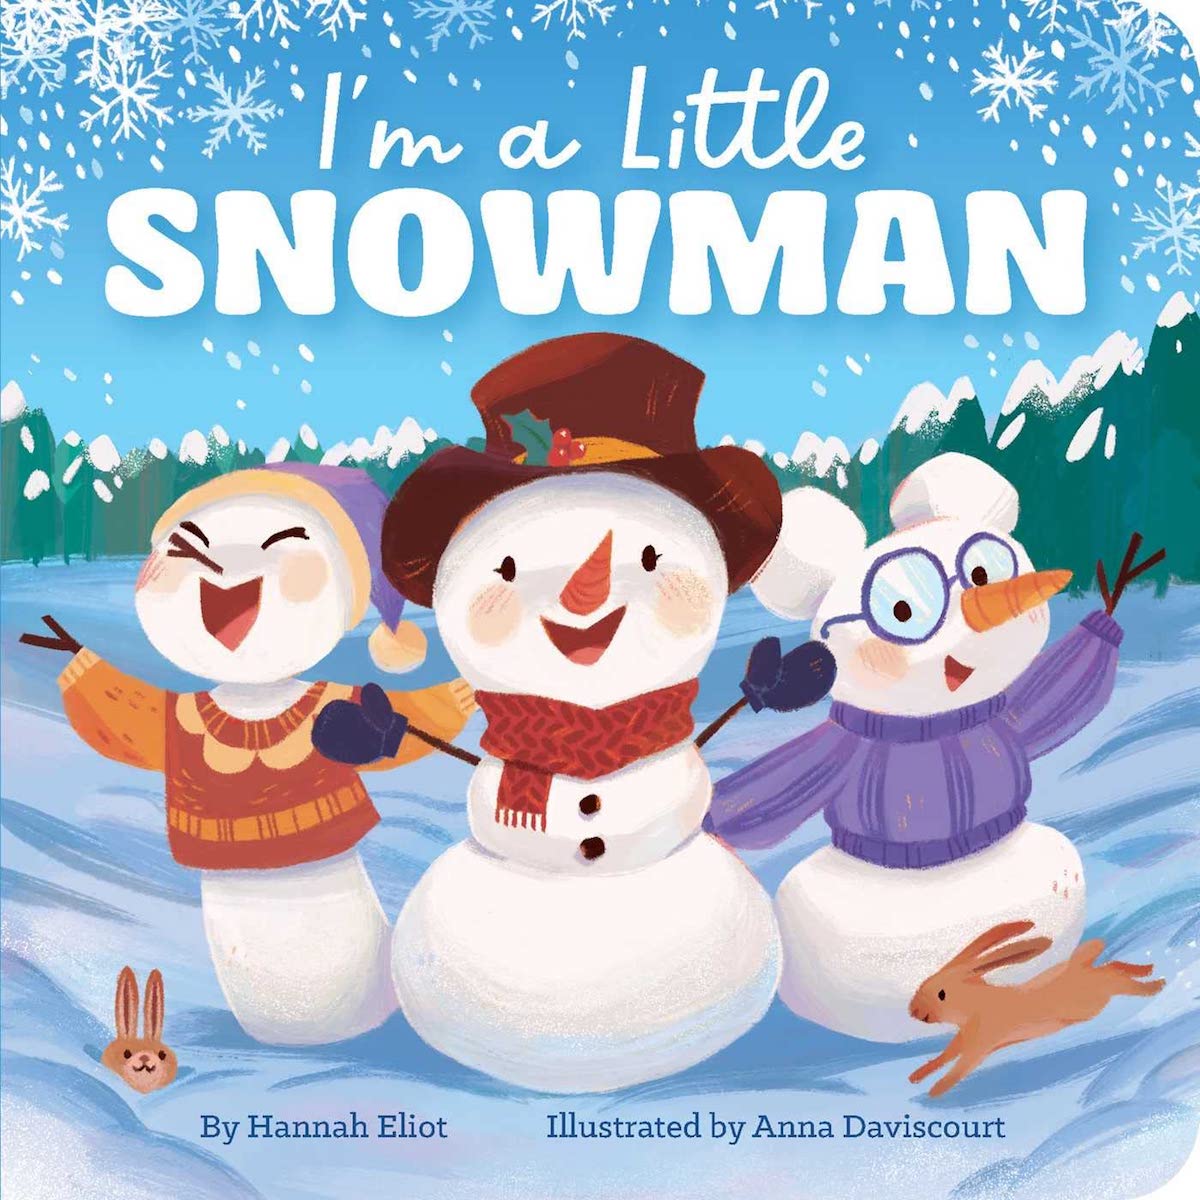 20 Holiday Books For Kids Perfect For Your Young Child’s Wish List